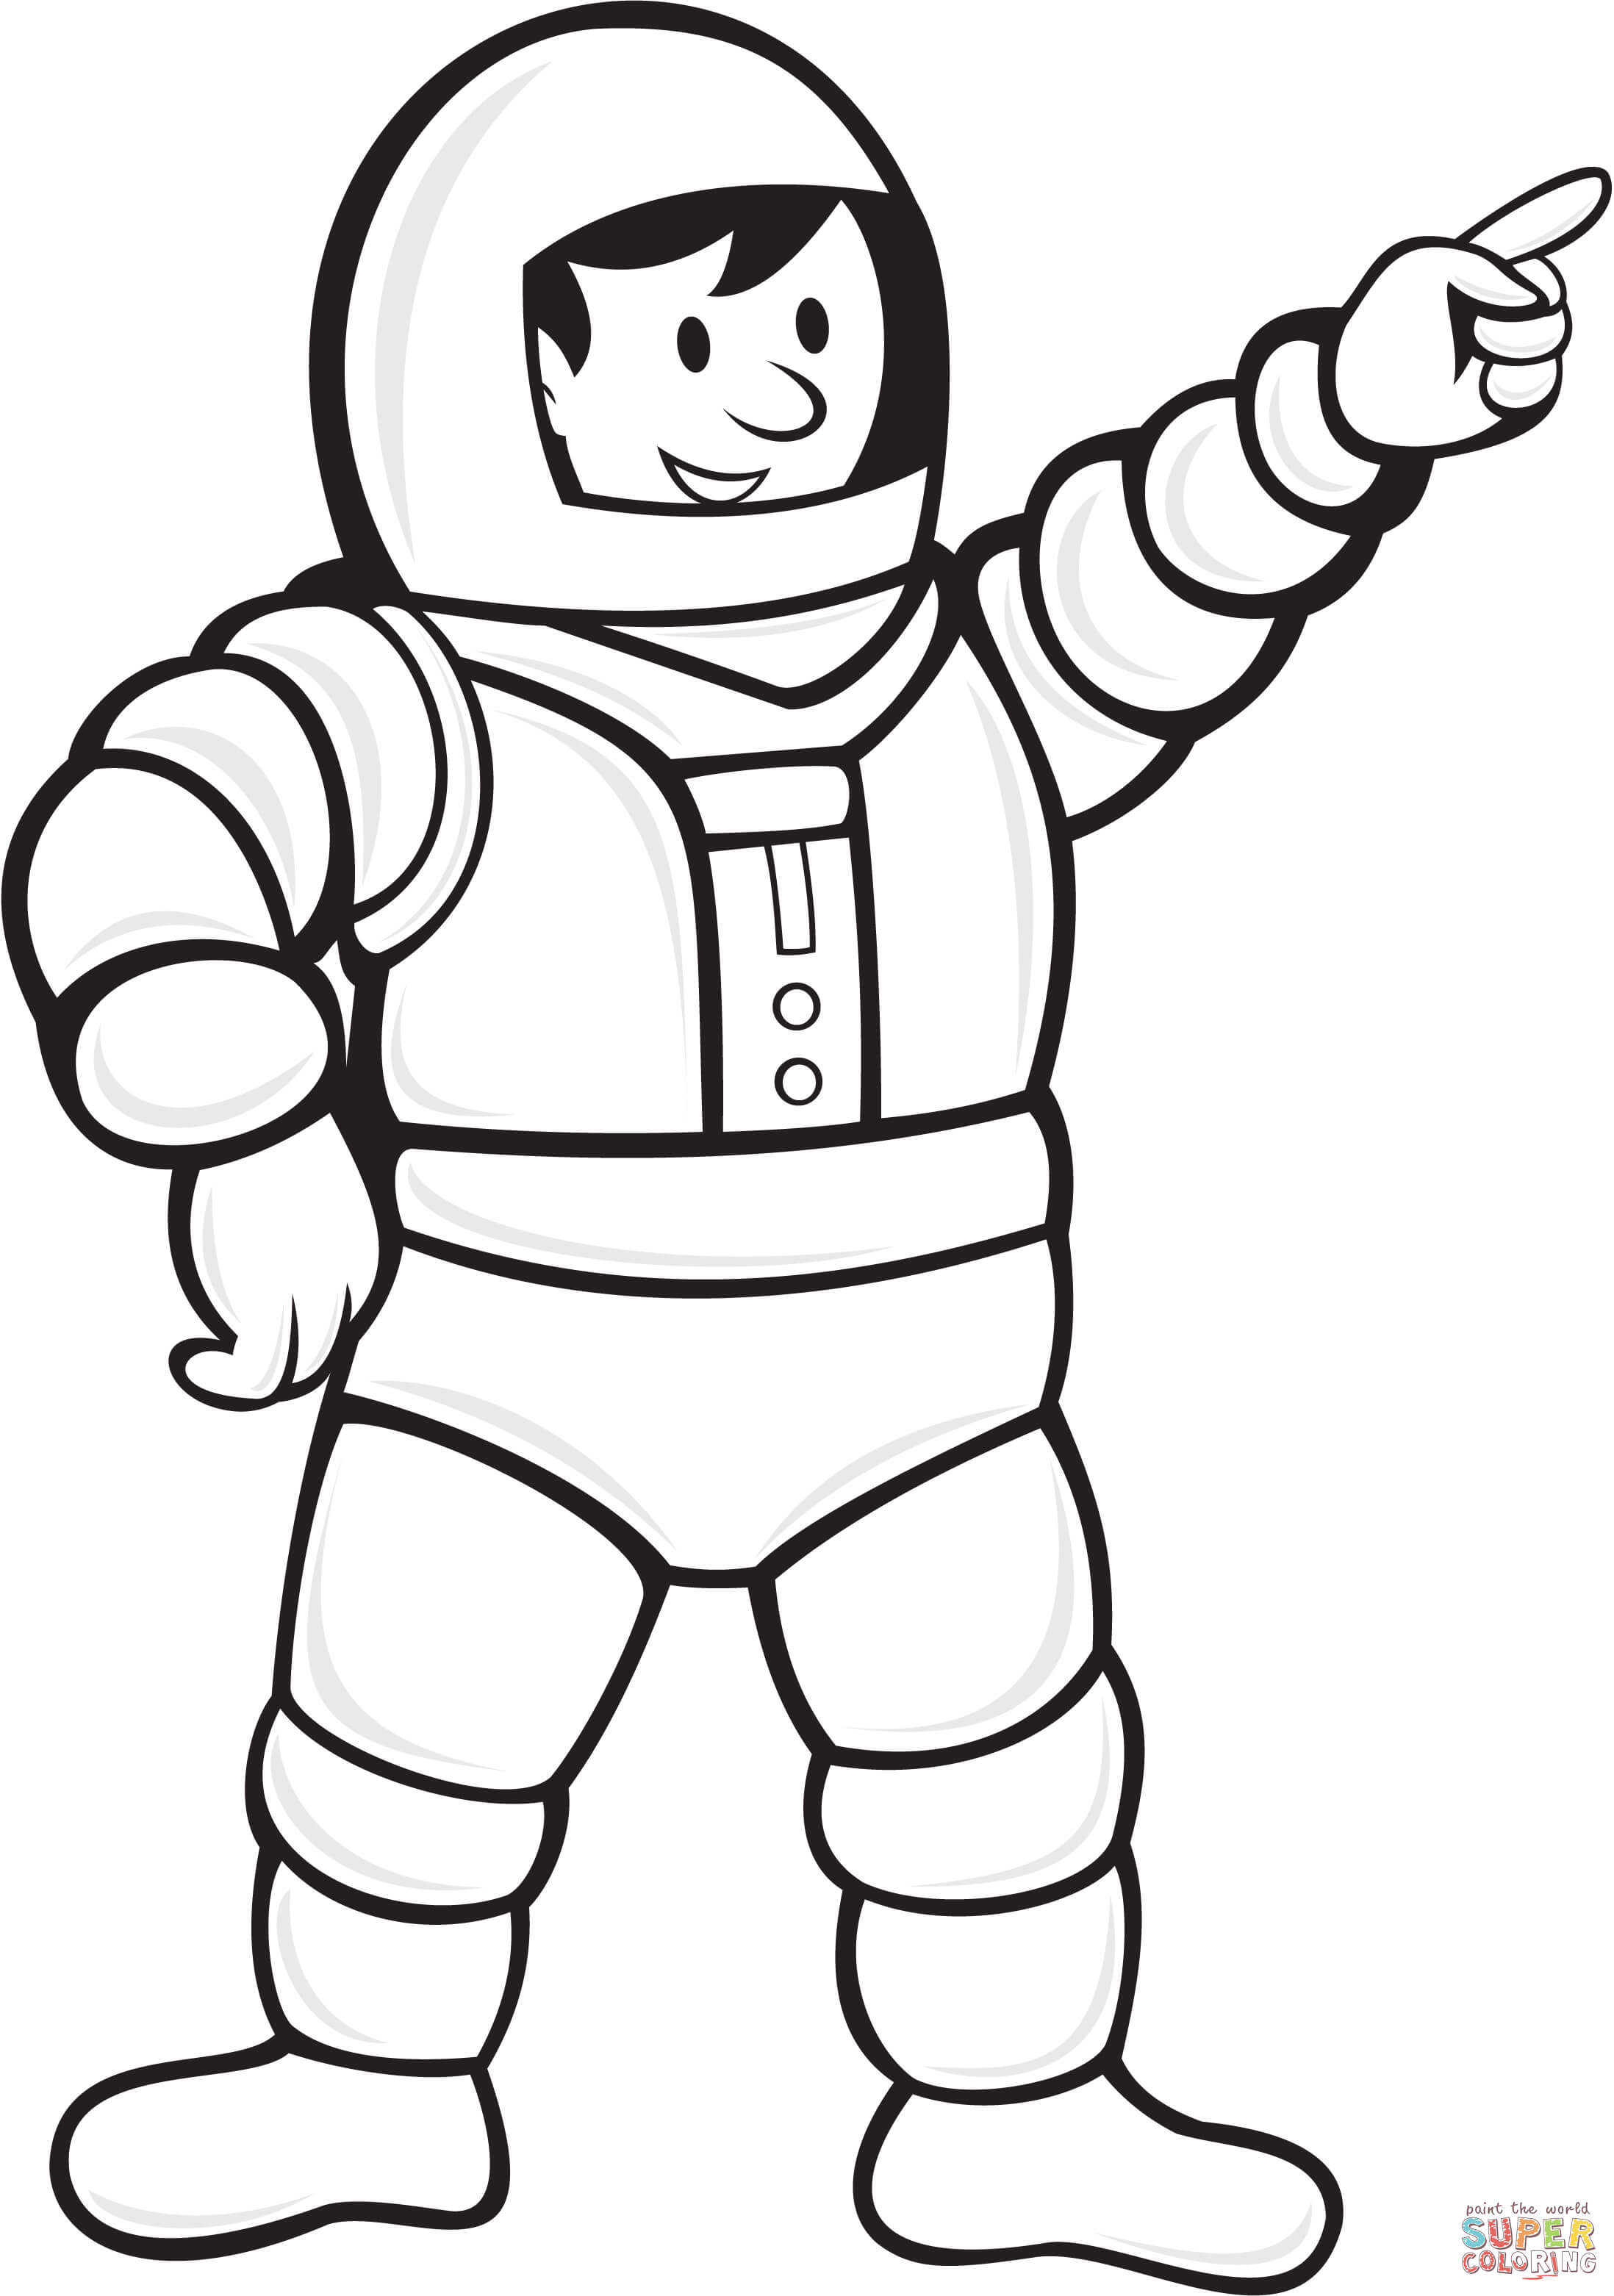 Astronaut in a space suit coloring page | Free Printable Coloring ...